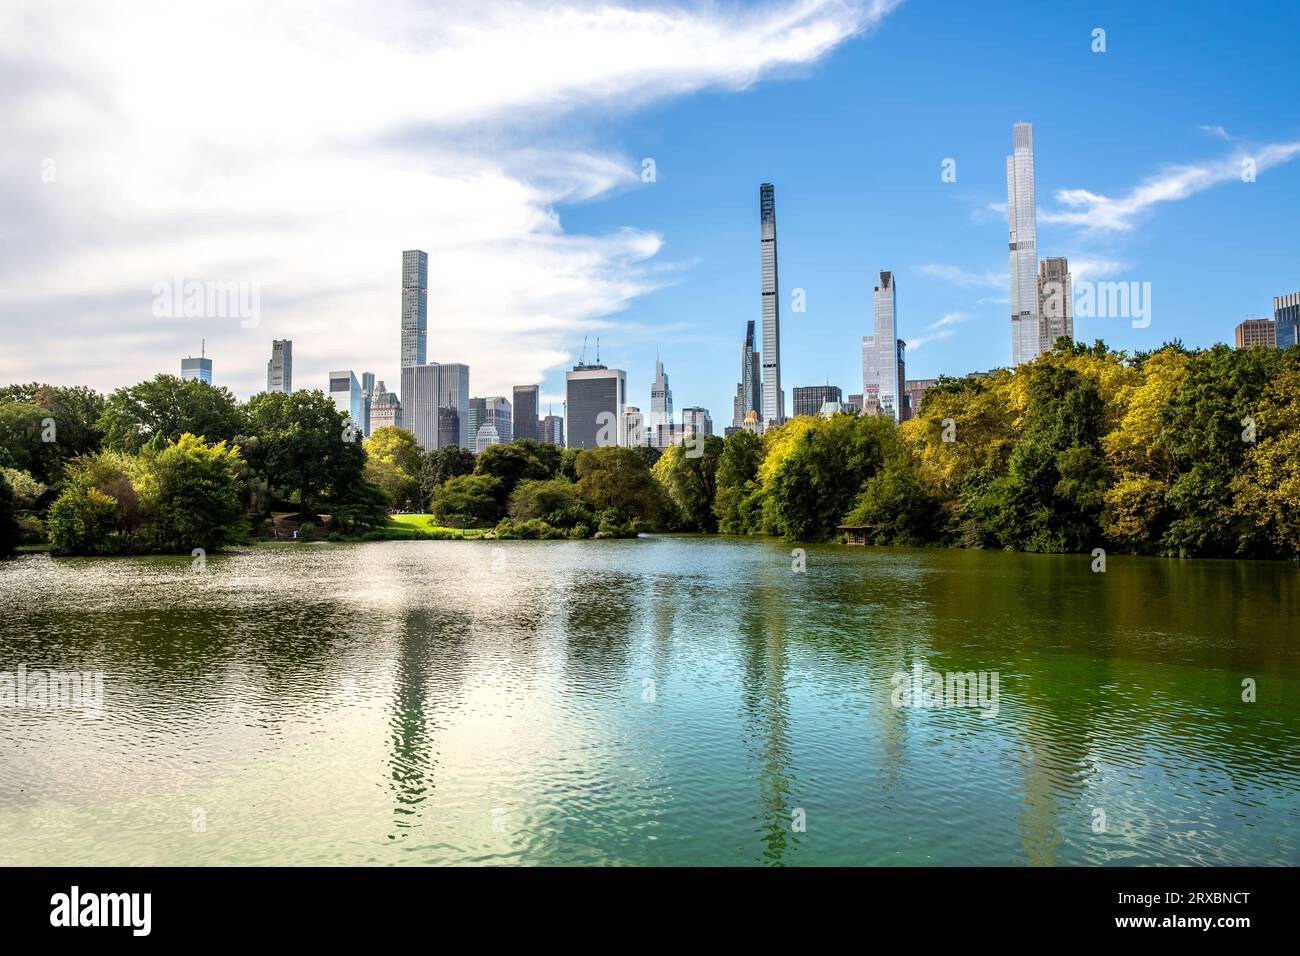 Midtown Manhattan skyscrapers and buildings including The Steinway Tower and Central Park Tower in a picturesque landscape with a view over The Lake Stock Photo